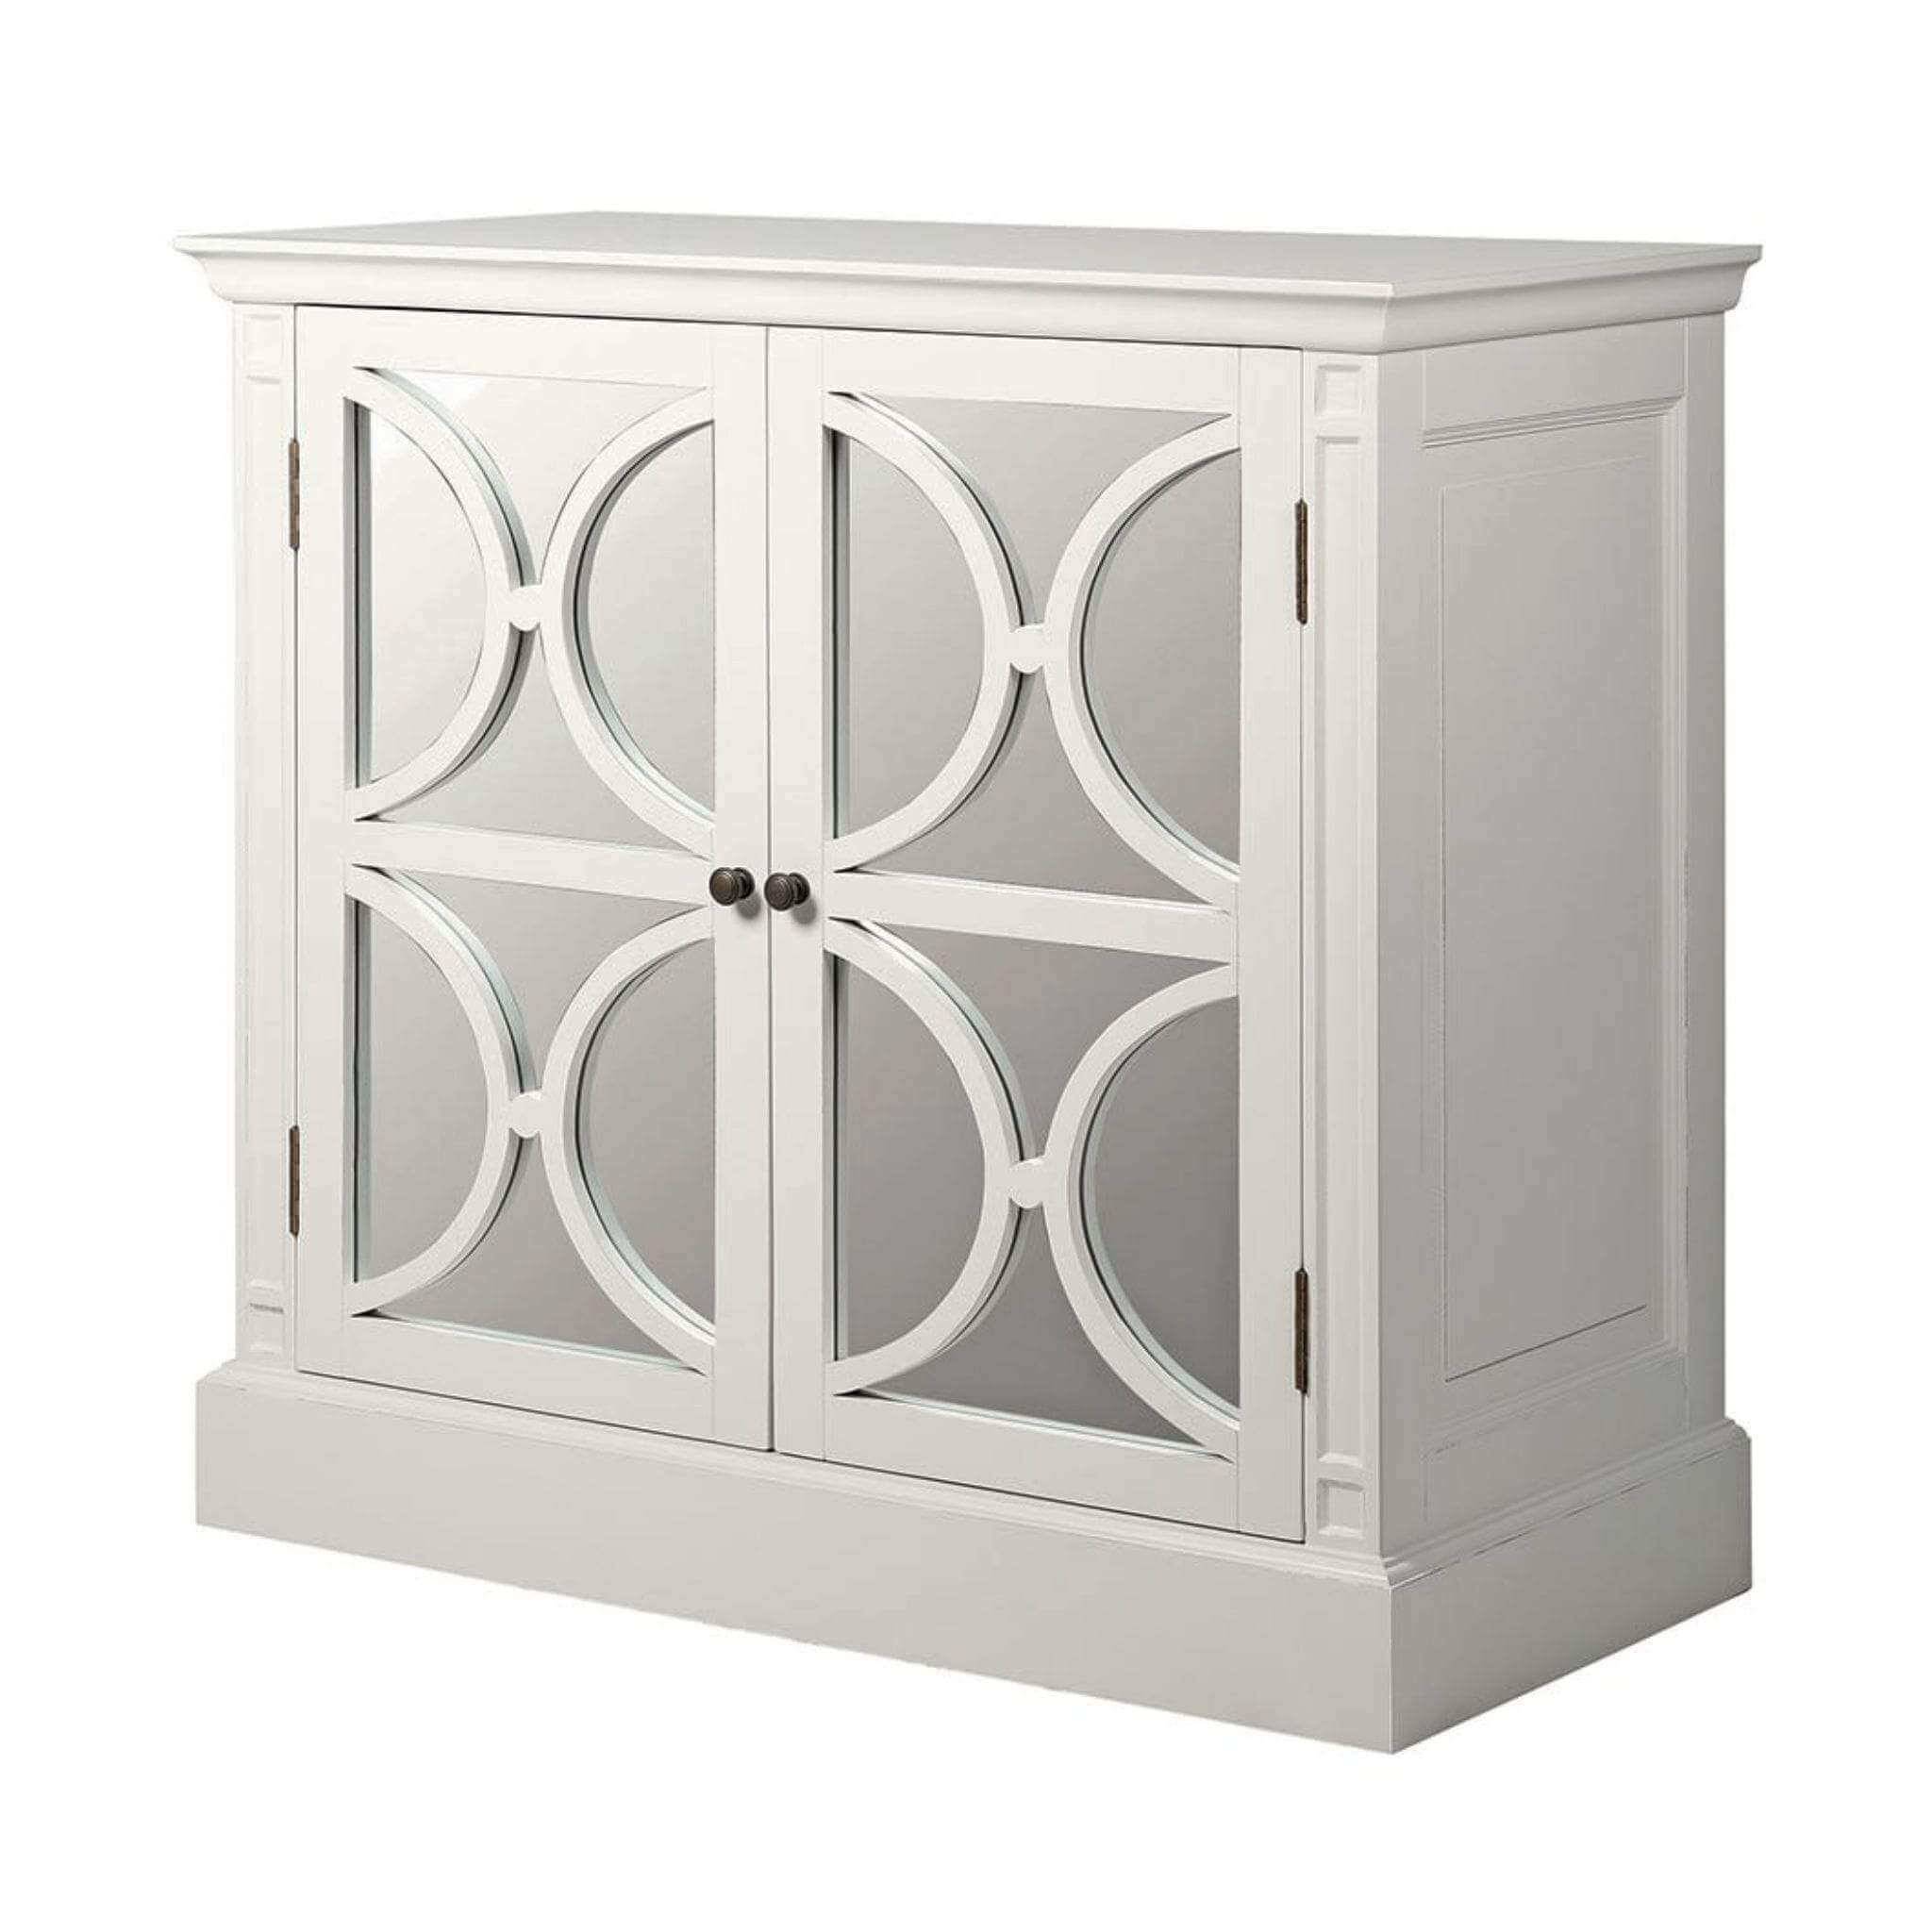 Escapology St Ermins 2-Door Mirrored Sideboard - White - escapologyhome.co.uk